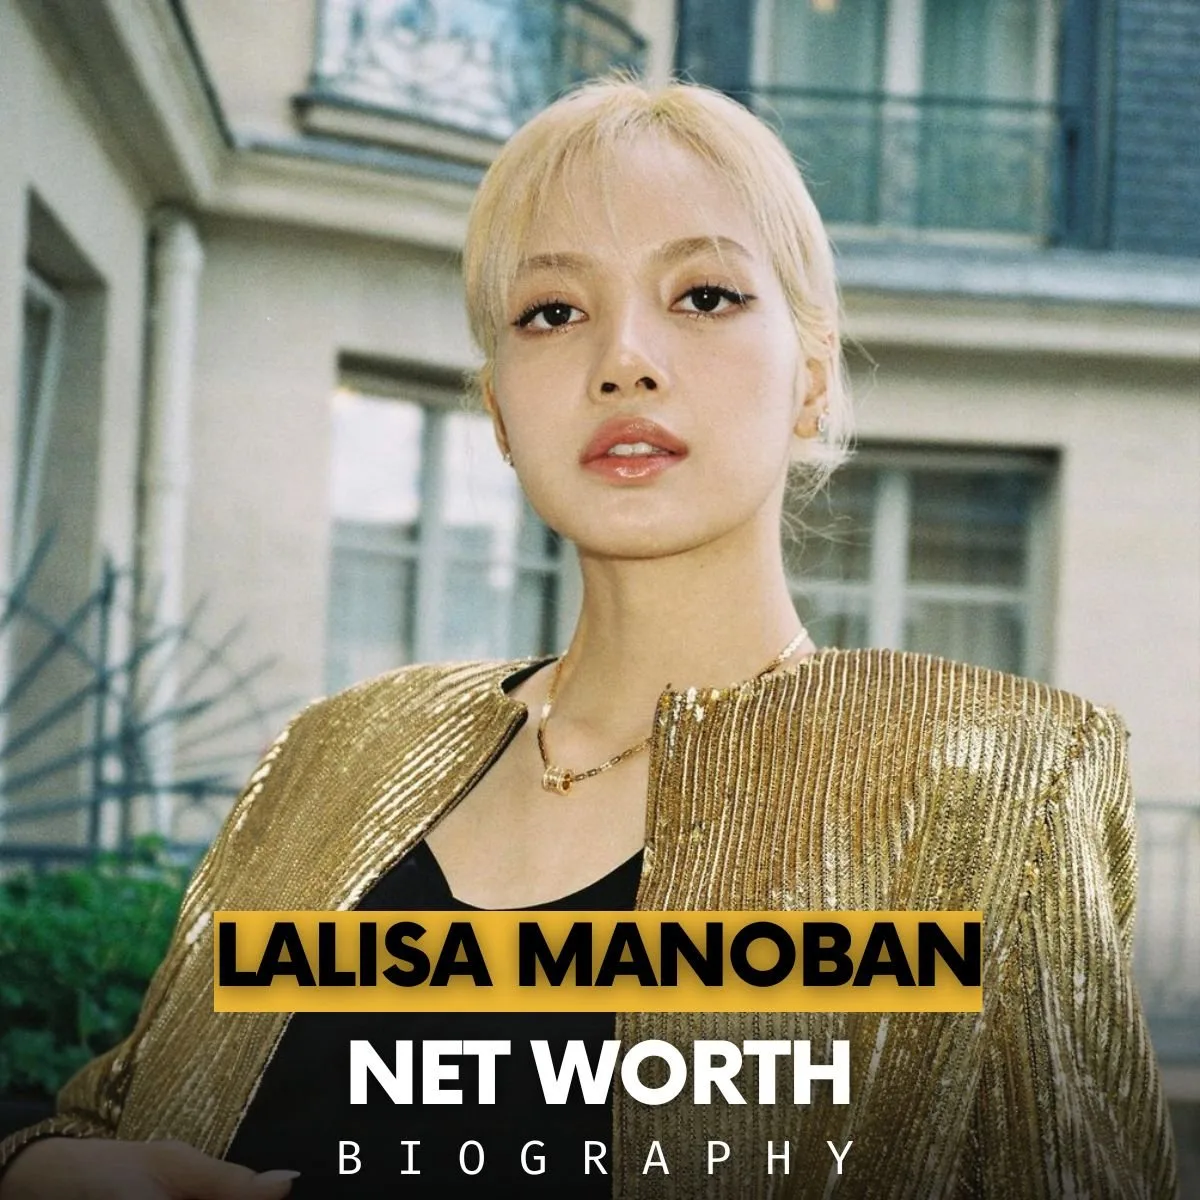 Picture of Lalisa Manoban from a photoshoot in Paris